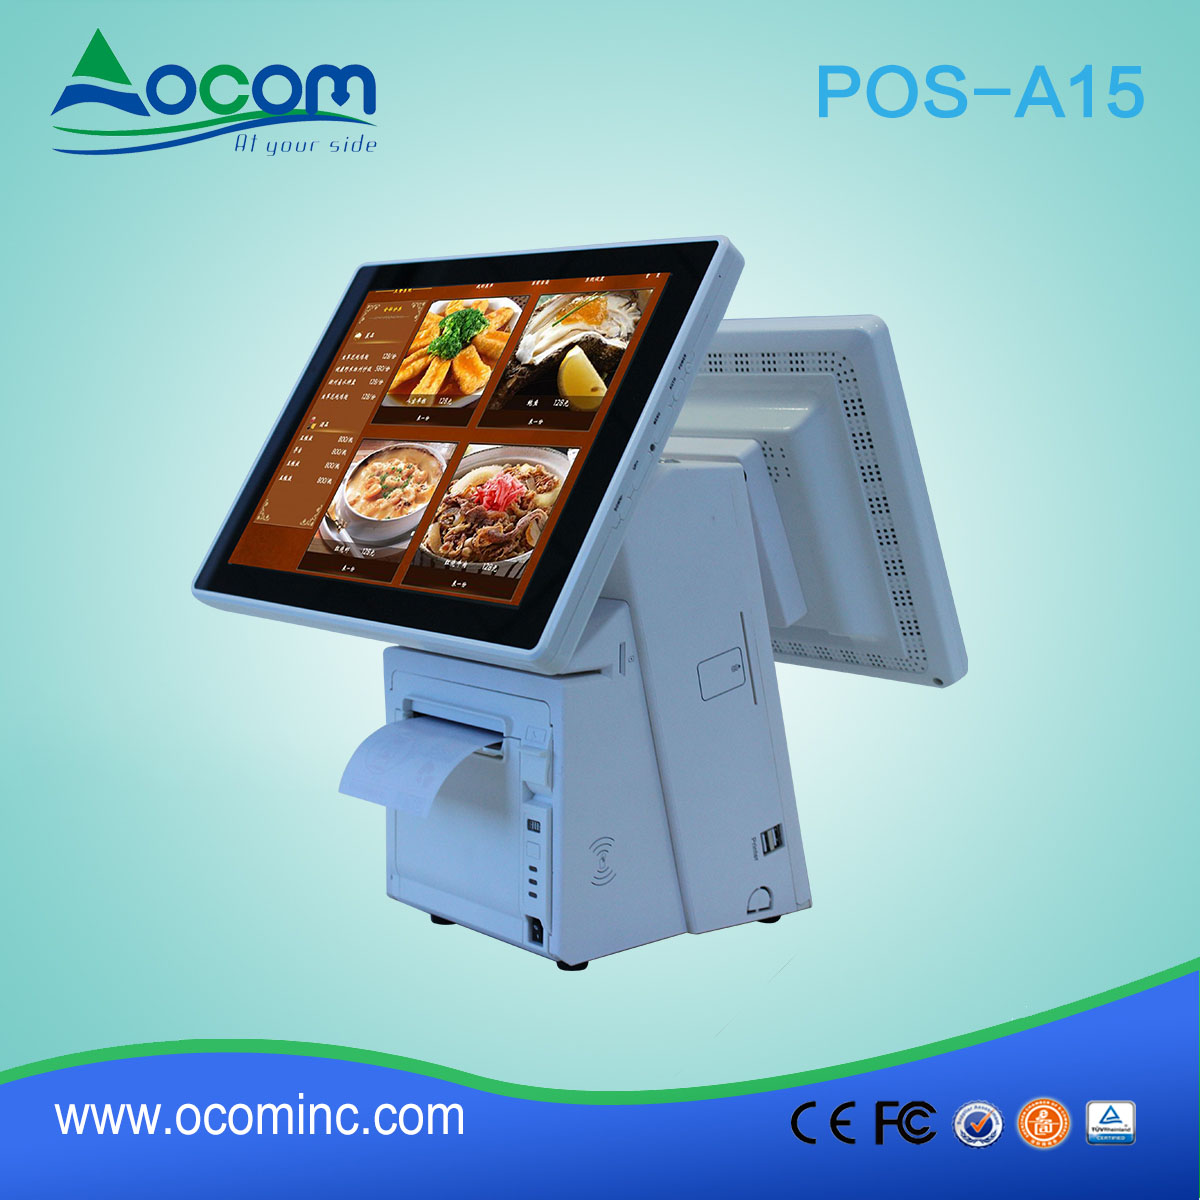 15.6" Windows Android all in one touch pos pc with printer